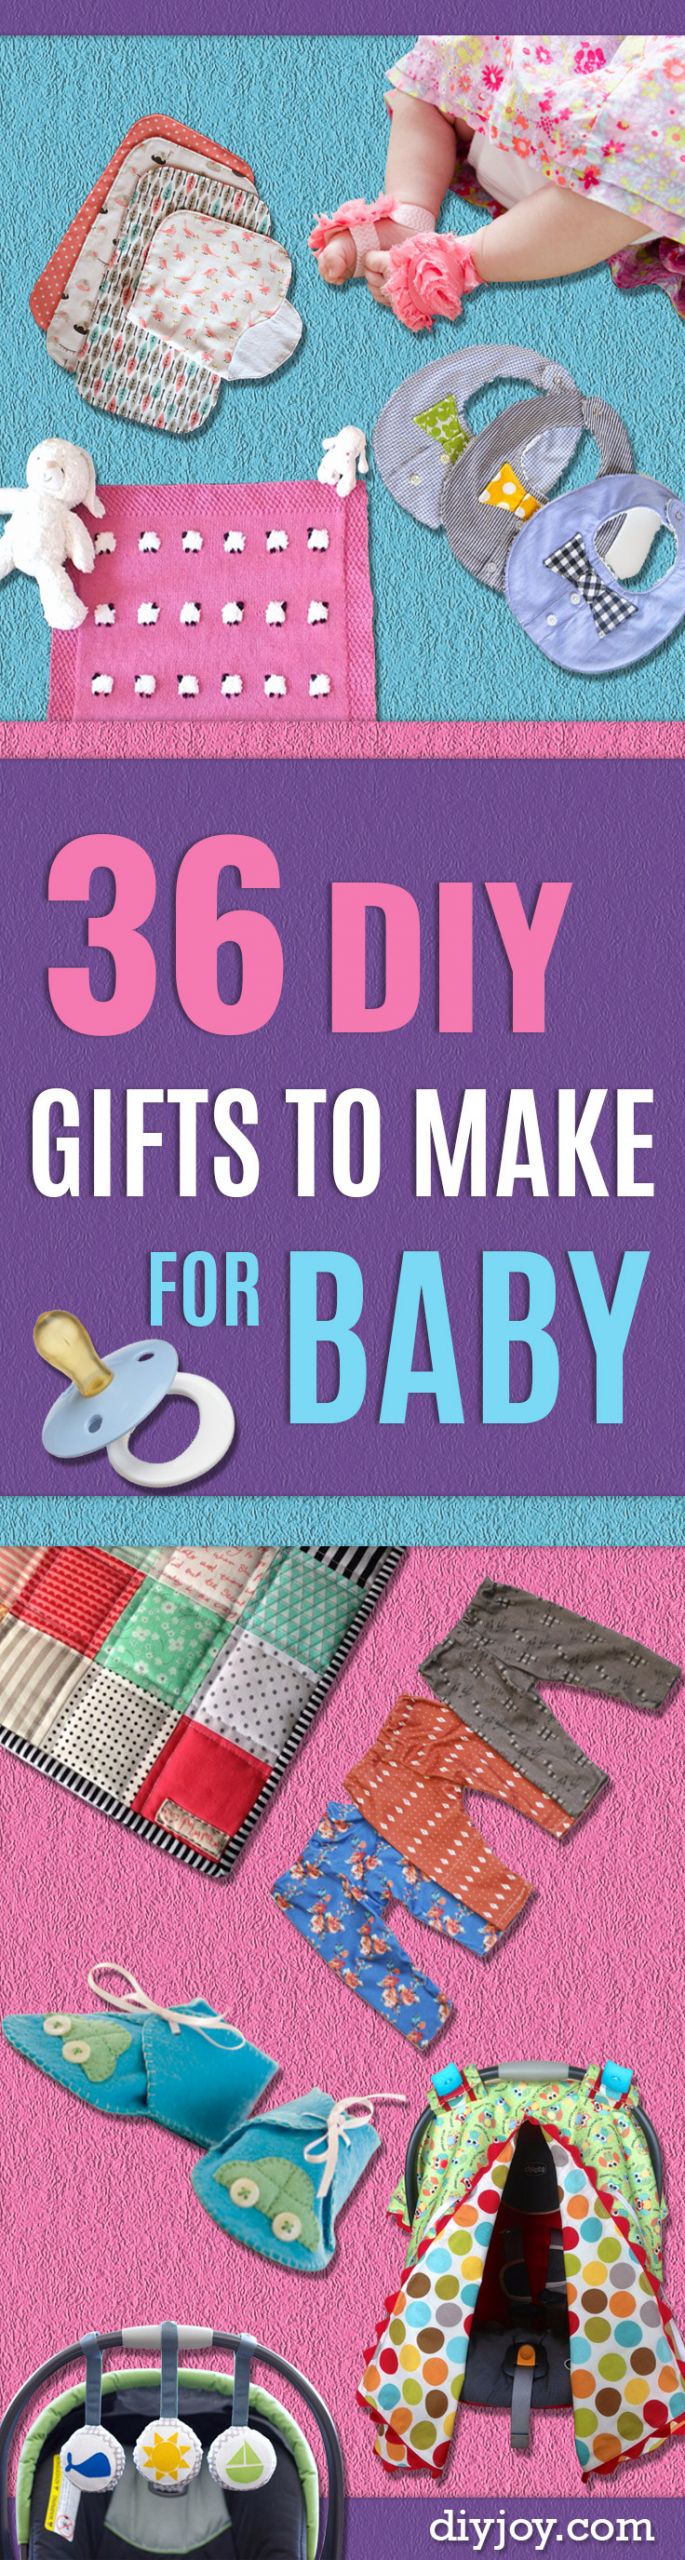 New Baby Gift Ideas For Parents
 36 Best DIY Gifts To Make For Baby